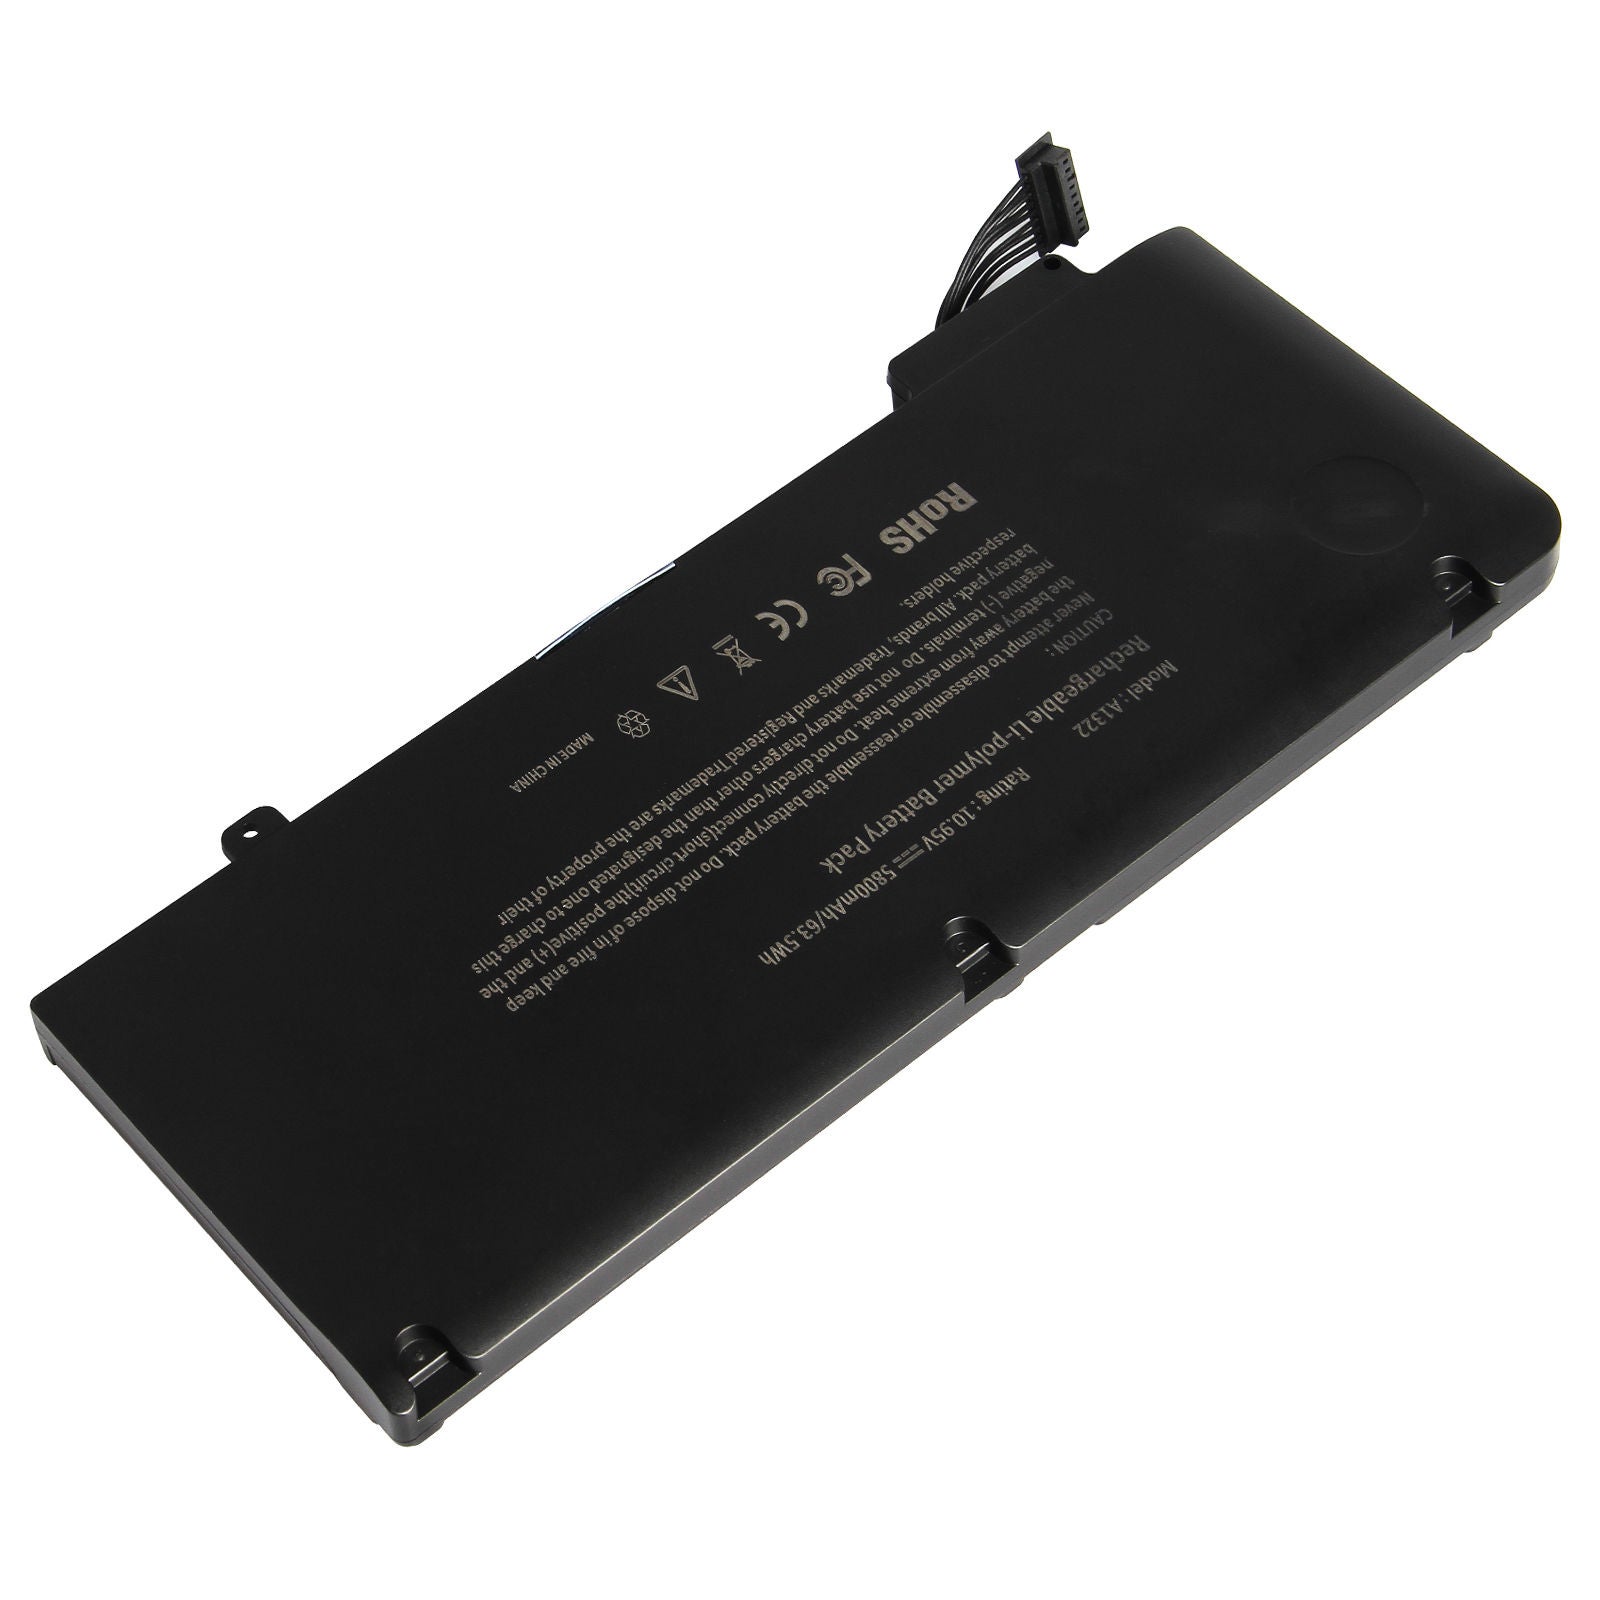 Battery for Apple MacBook Pro 13 inch A1322 A1278 2009 2010 2011 2012